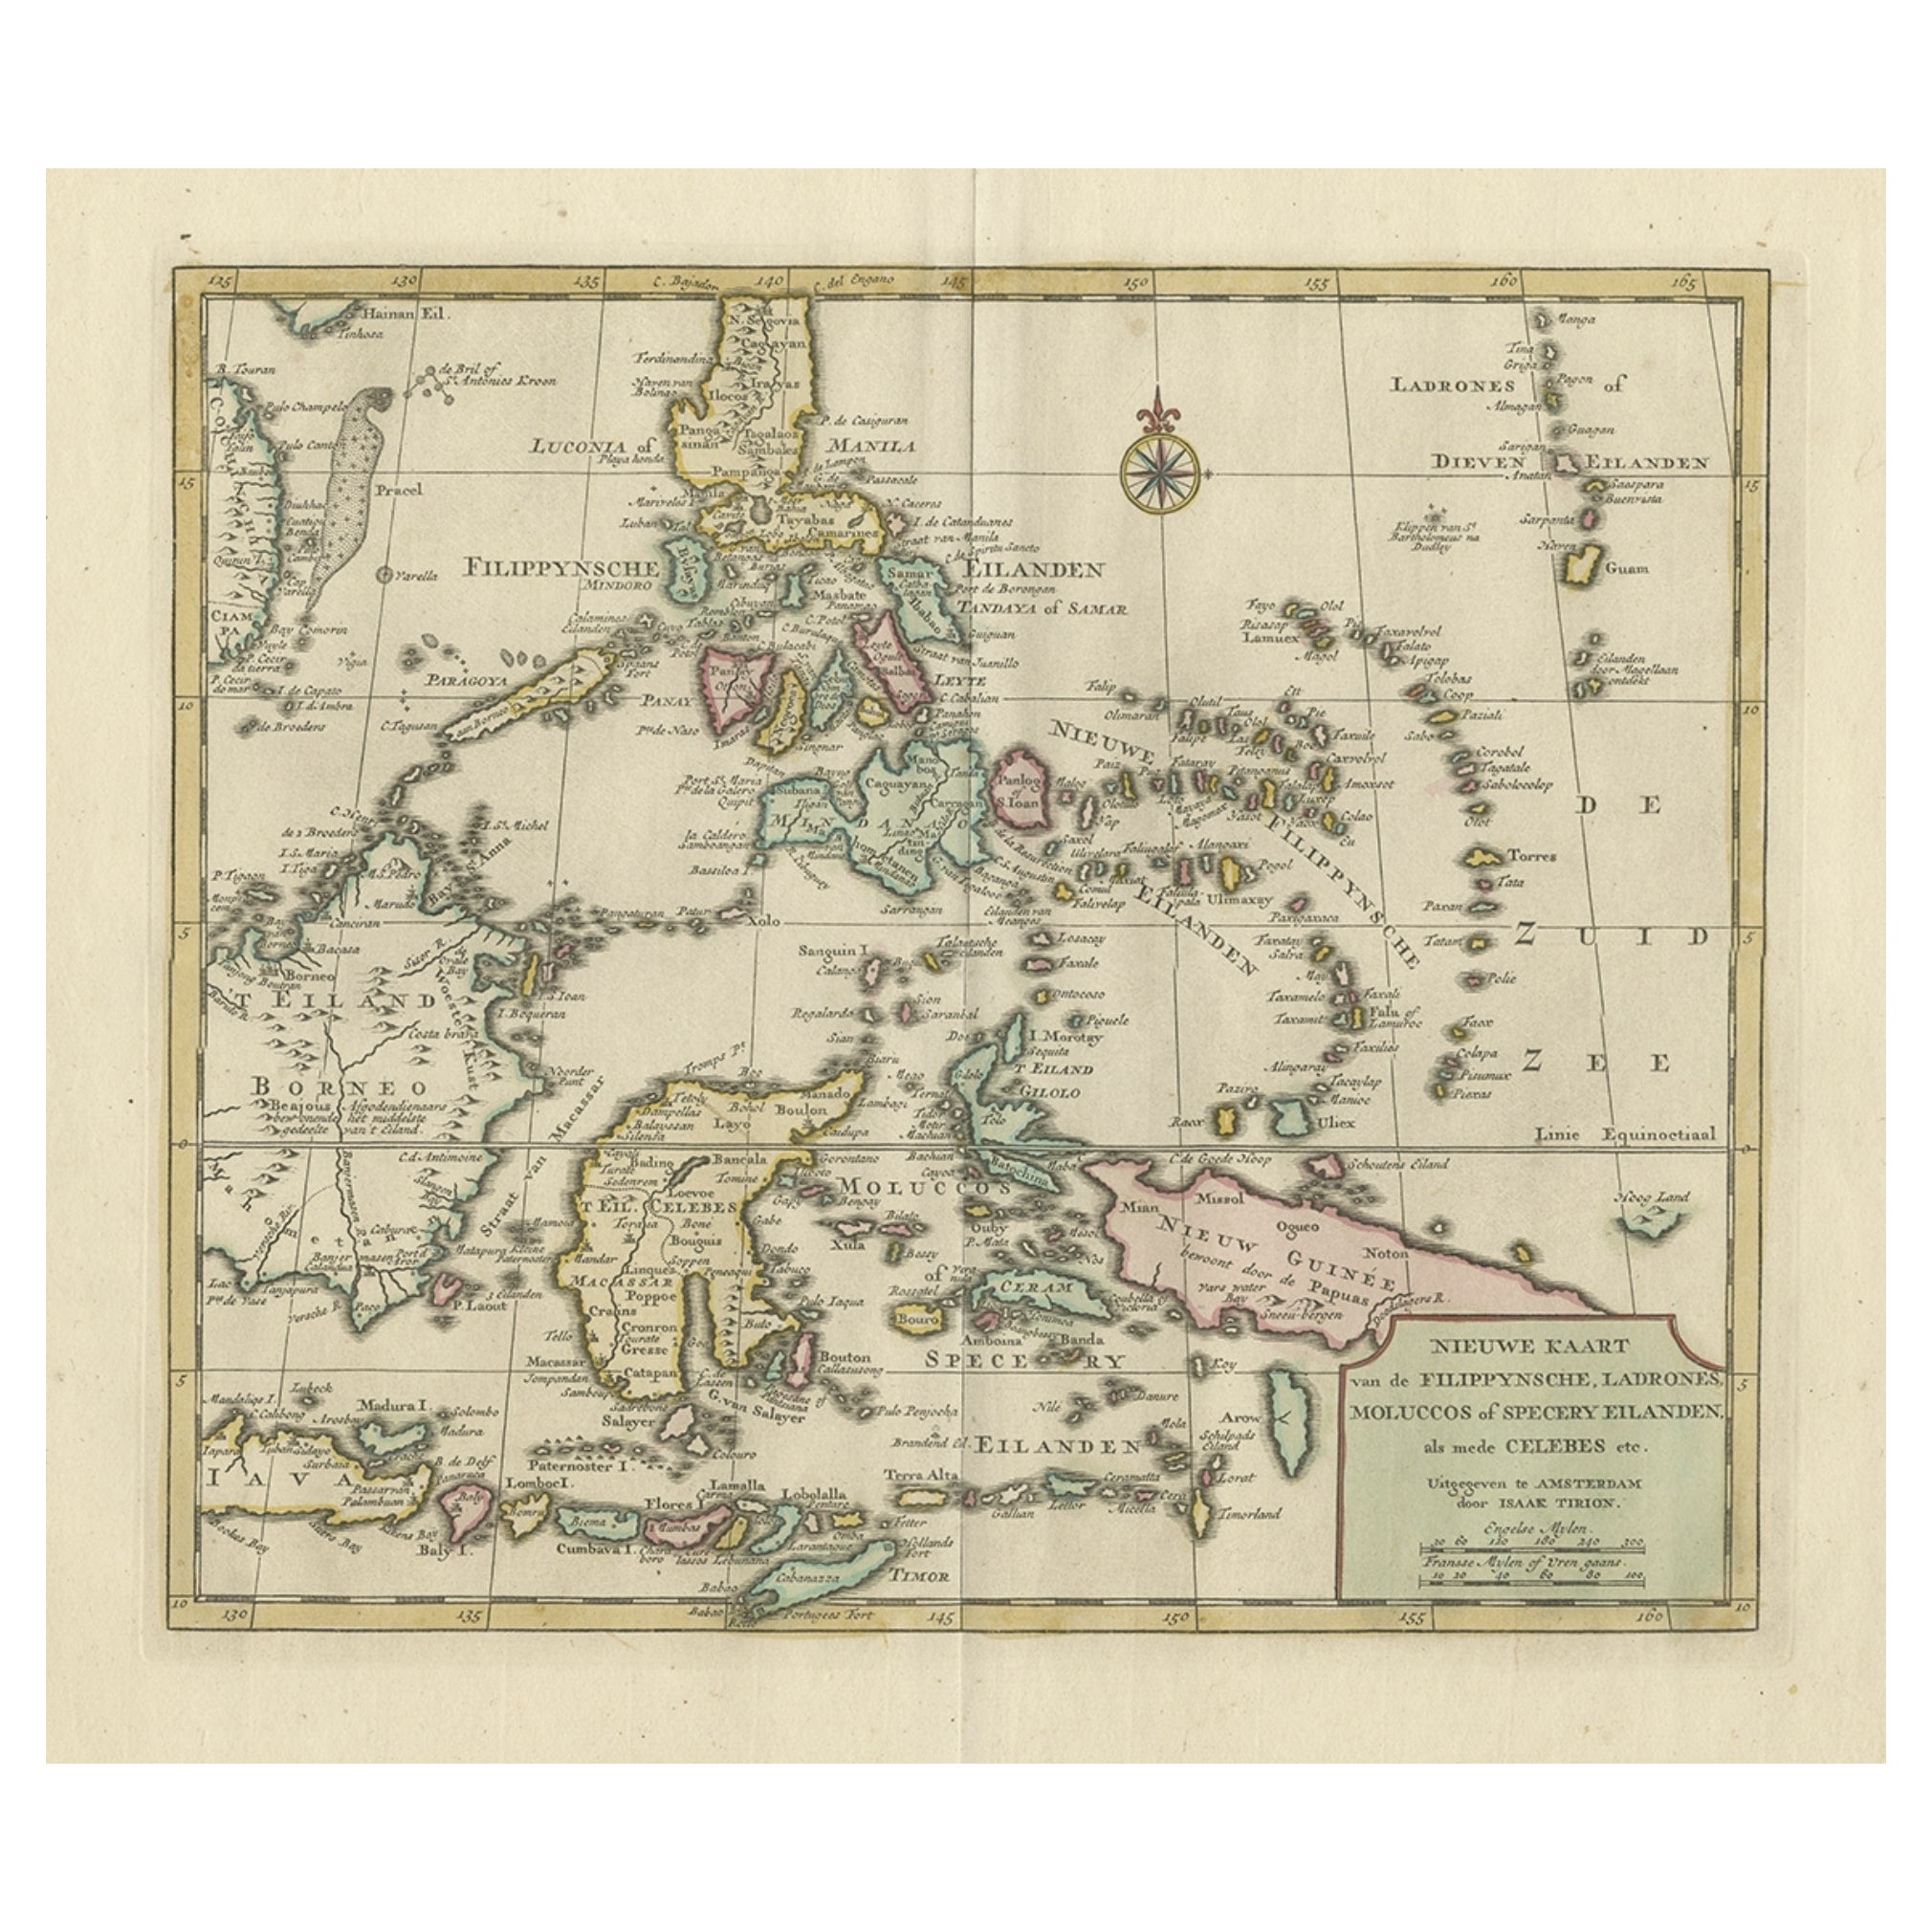 Old Original Map of the Philippines and Part of Indonesia 'Spice Islands', 1744 For Sale